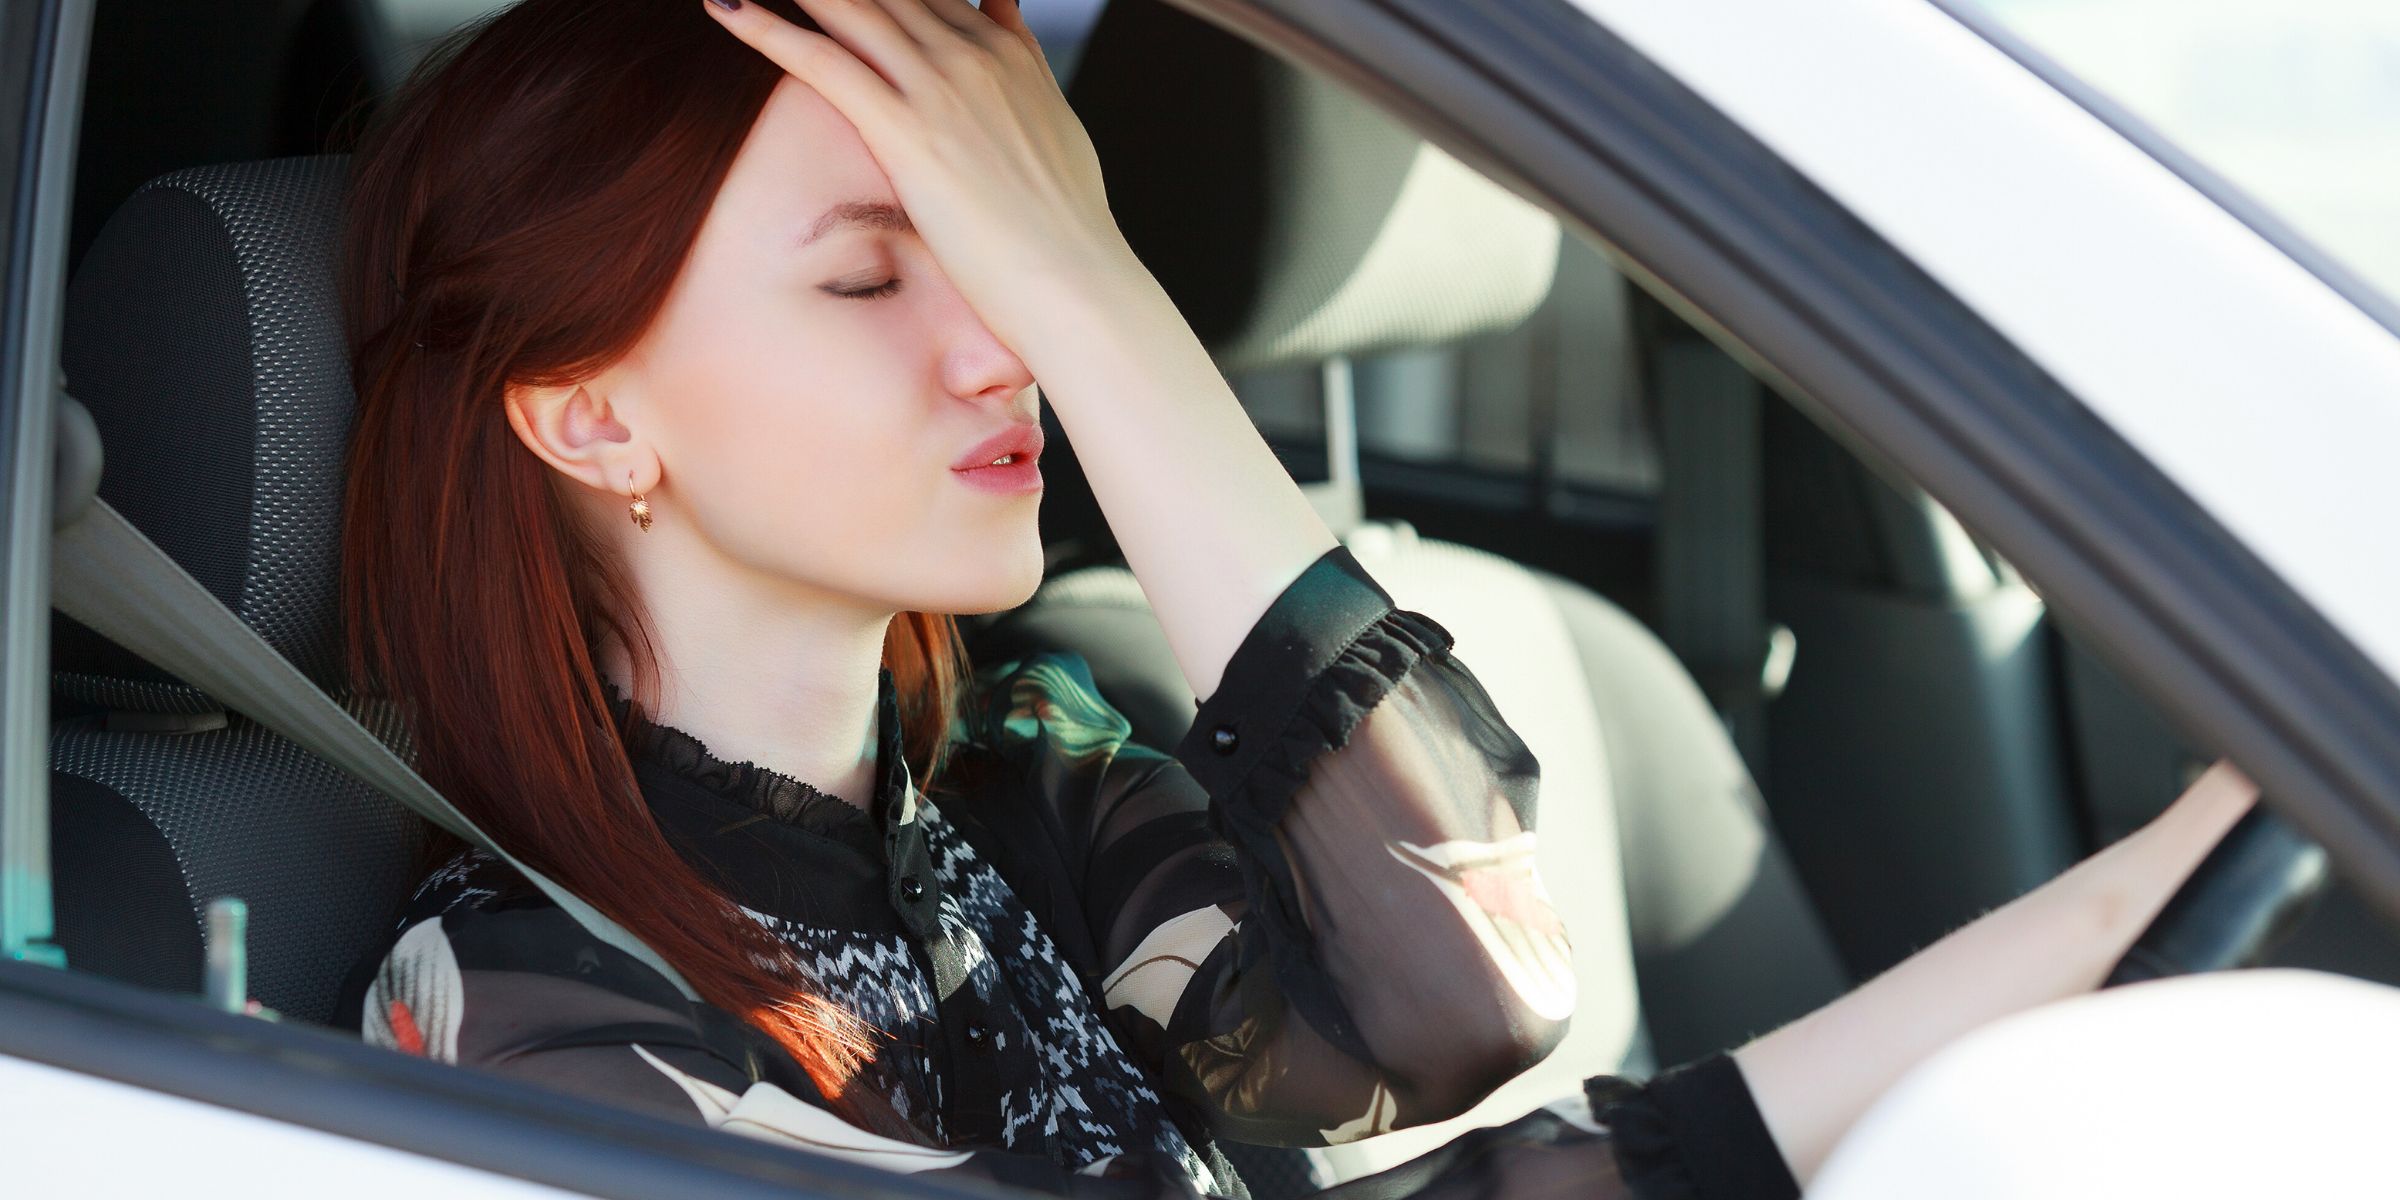 redhead woman hitting forehead in frustration road rage in car stressed out